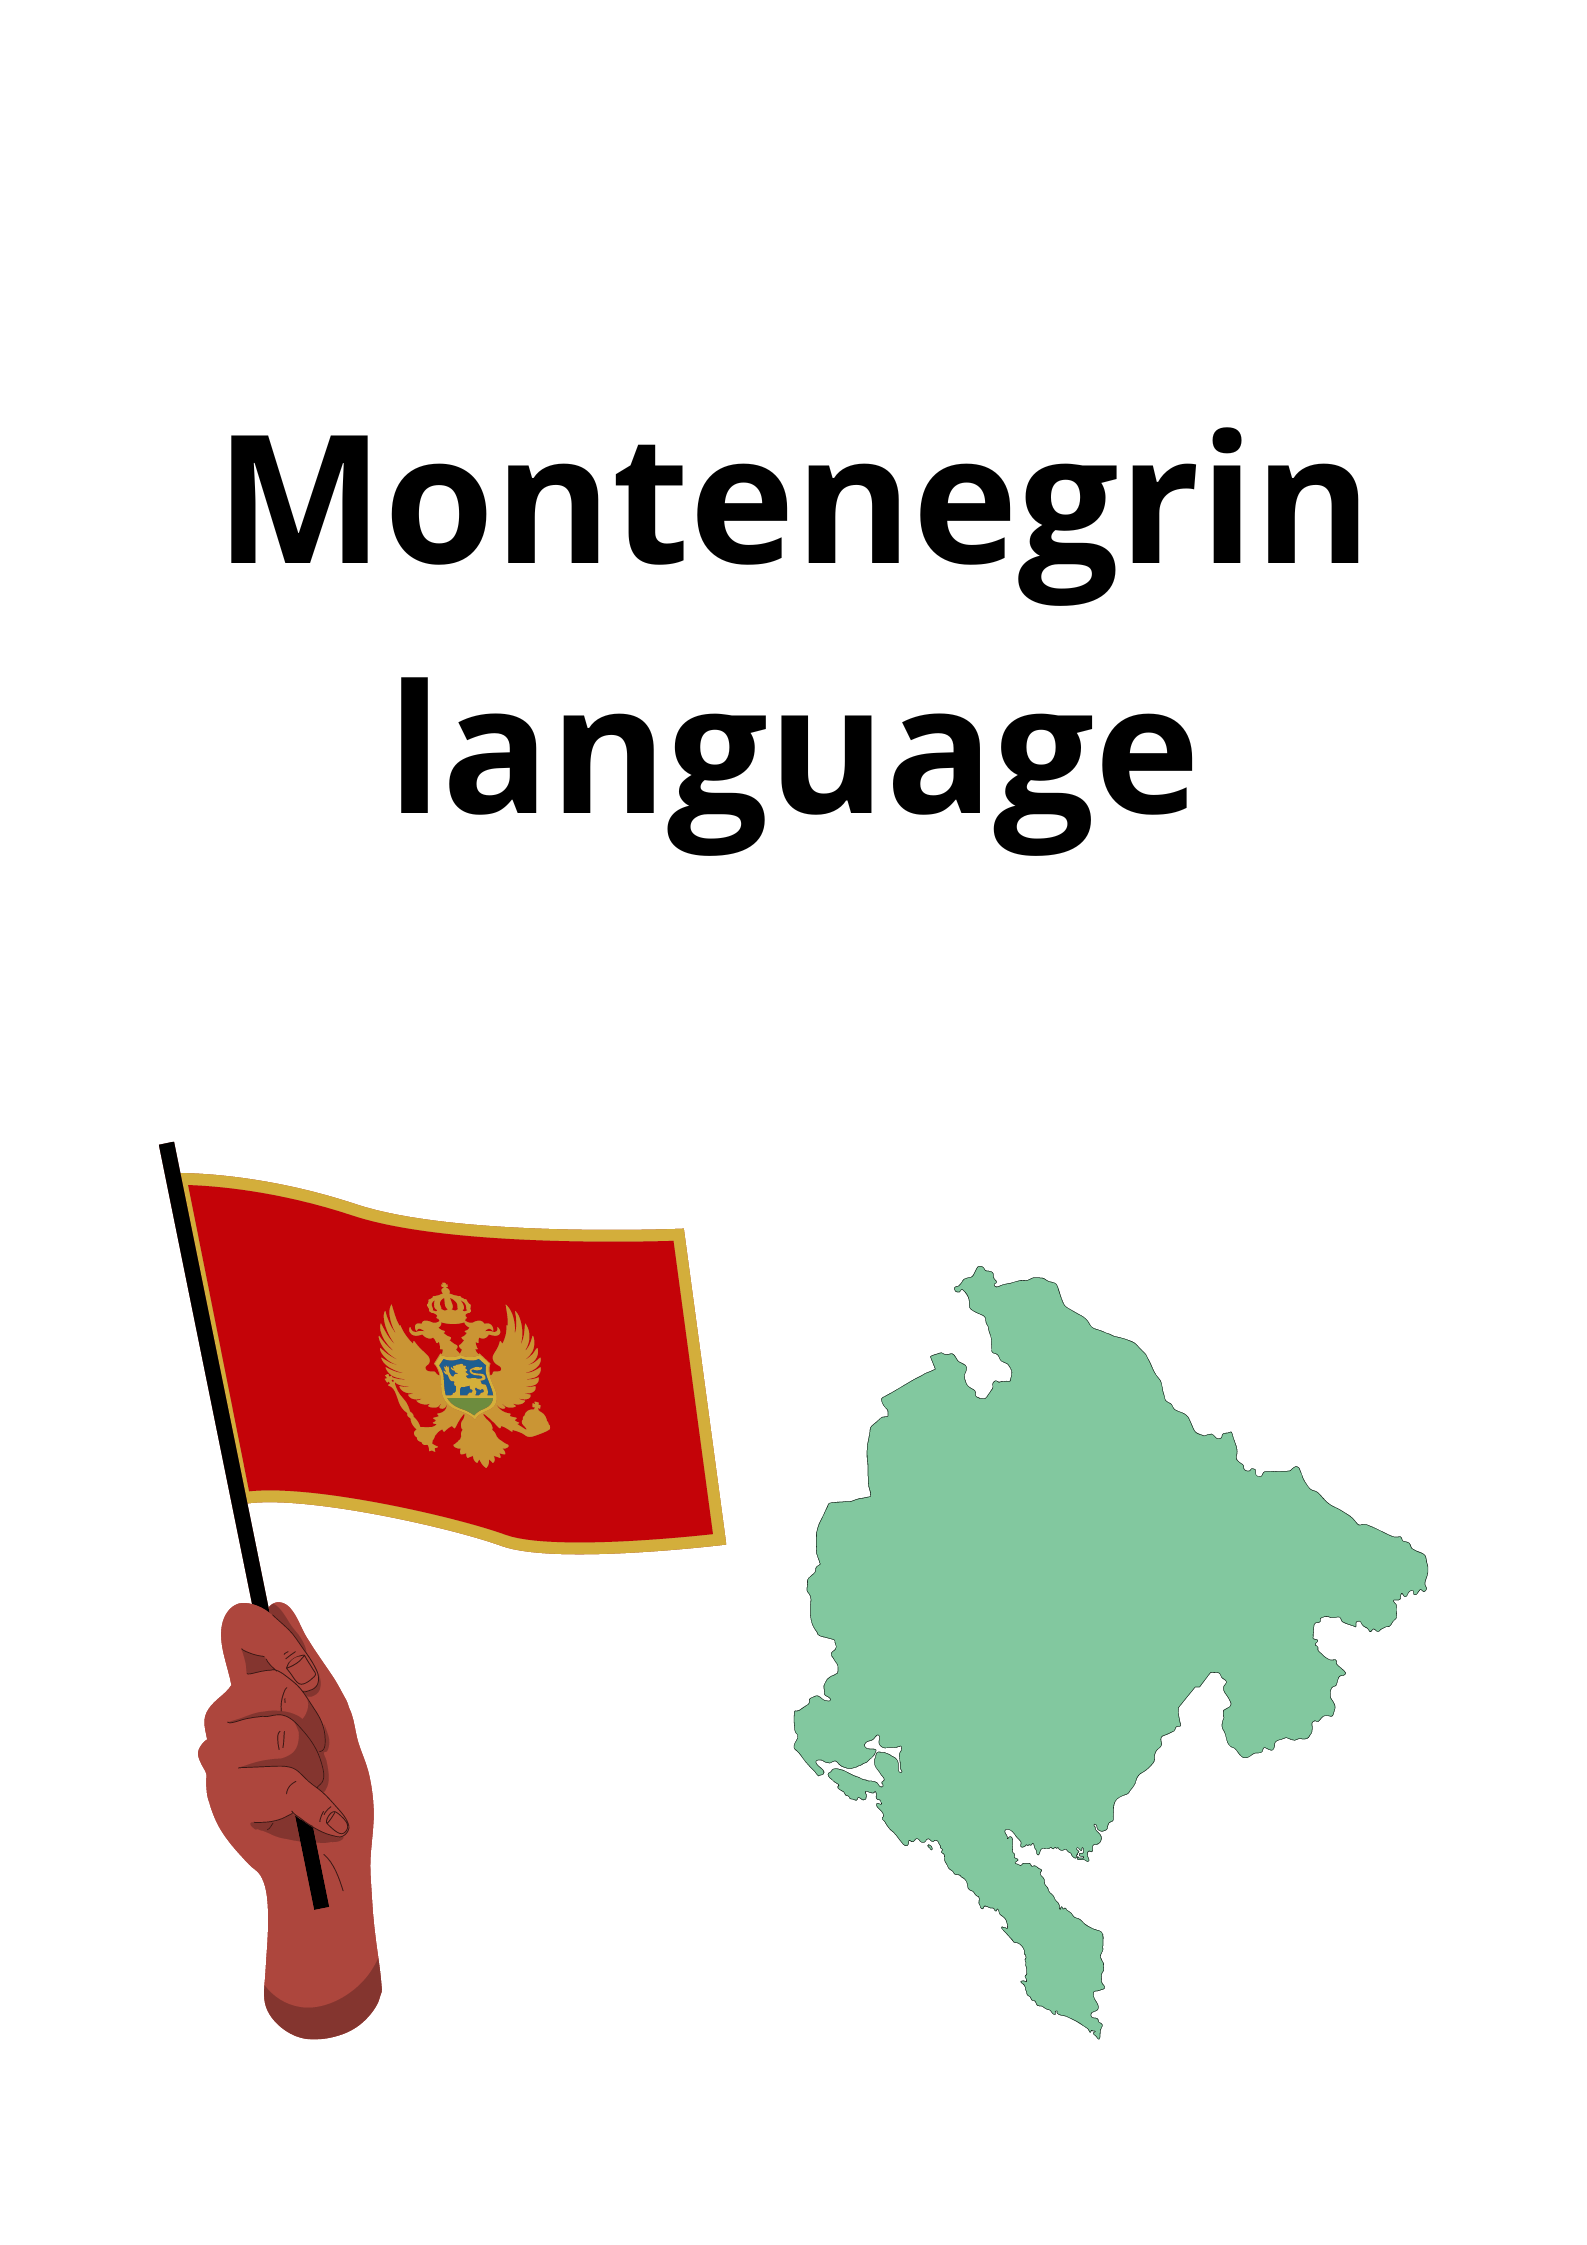 What’s the Most Difficult to Learn in Montenegrin language?